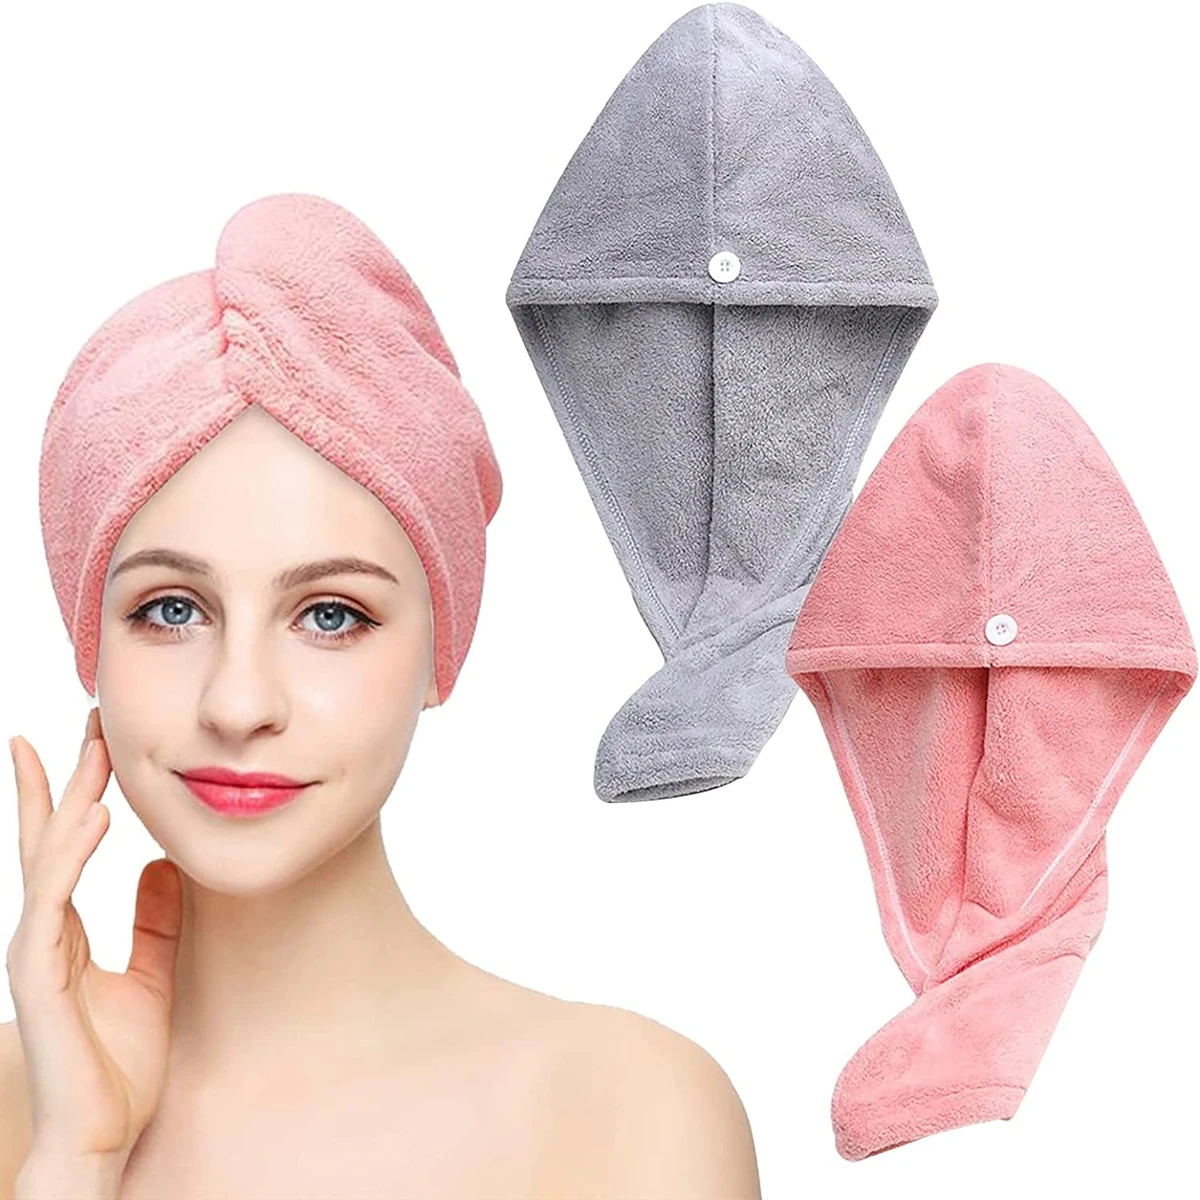 Hair Towel, Hair Drying Towels with Buttons, Super Absorbent Microfiber Hair Towel Dry Hair Quickly for Women Pink